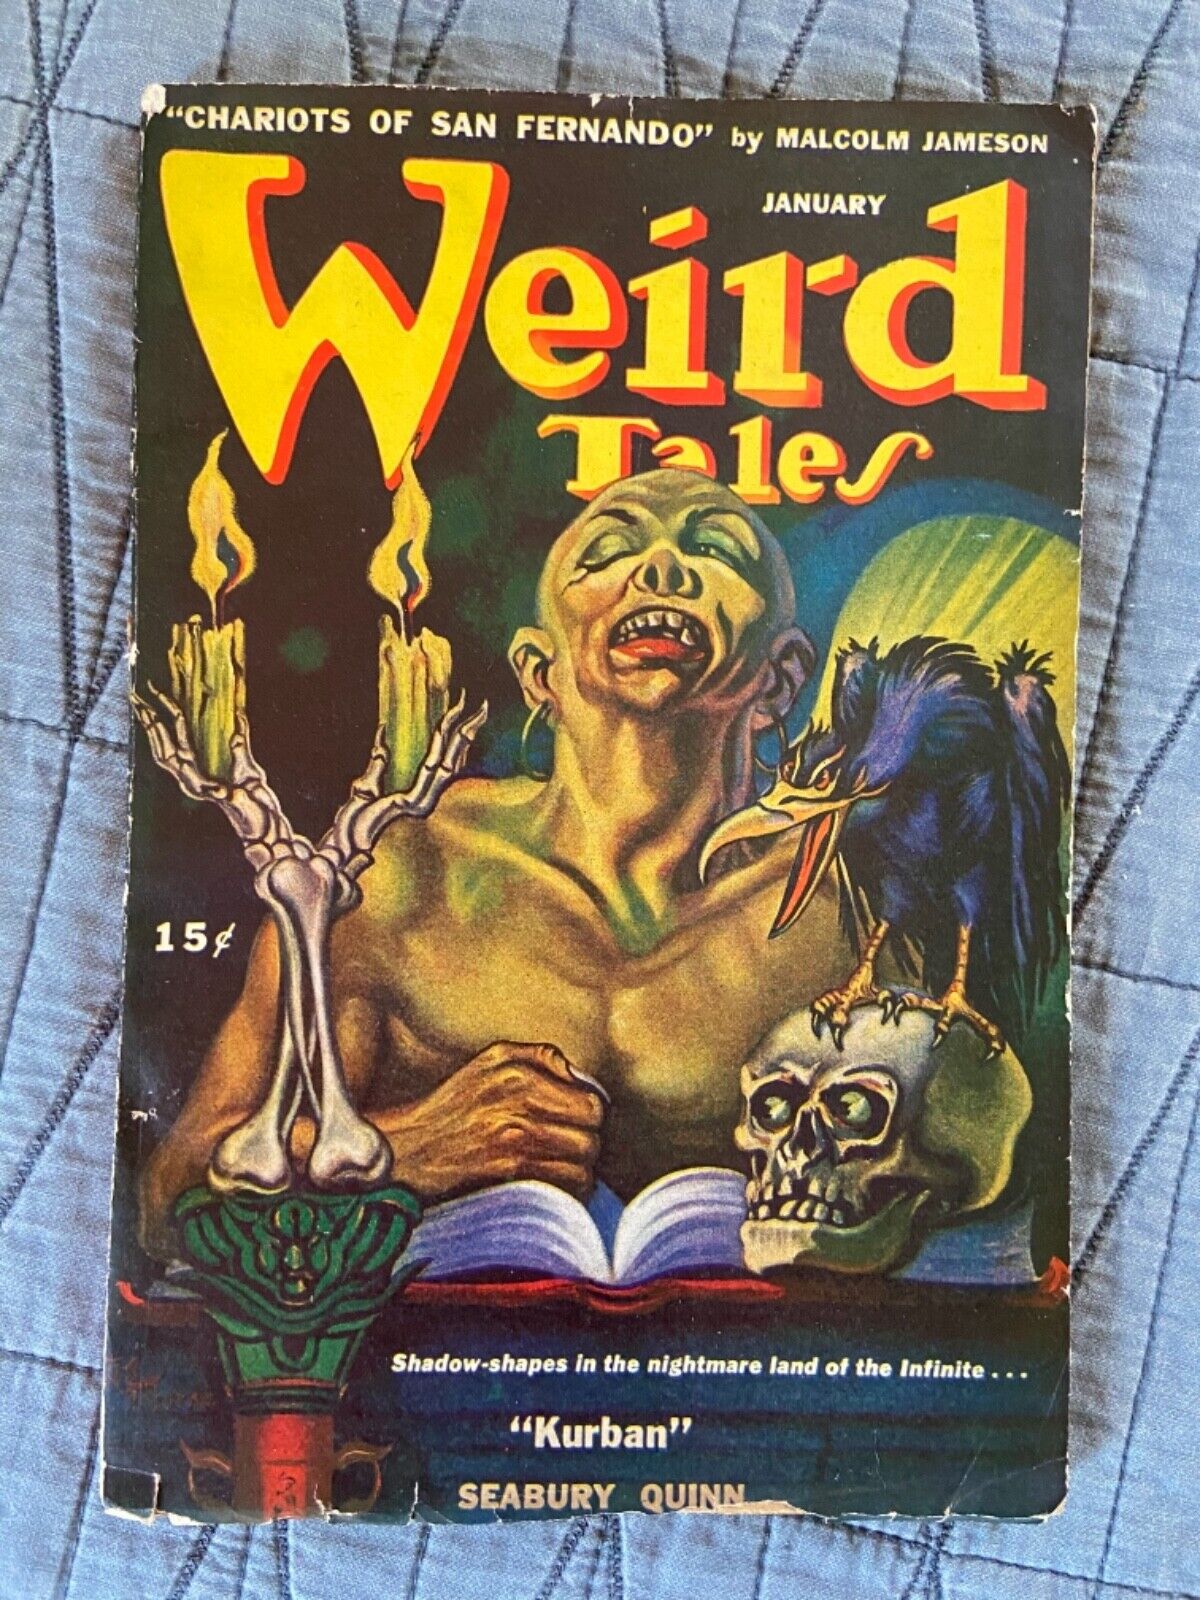 RARE JANUARY 1946 WEIRD TALES PULP CLASSIC SKULL COVER COMPLETE